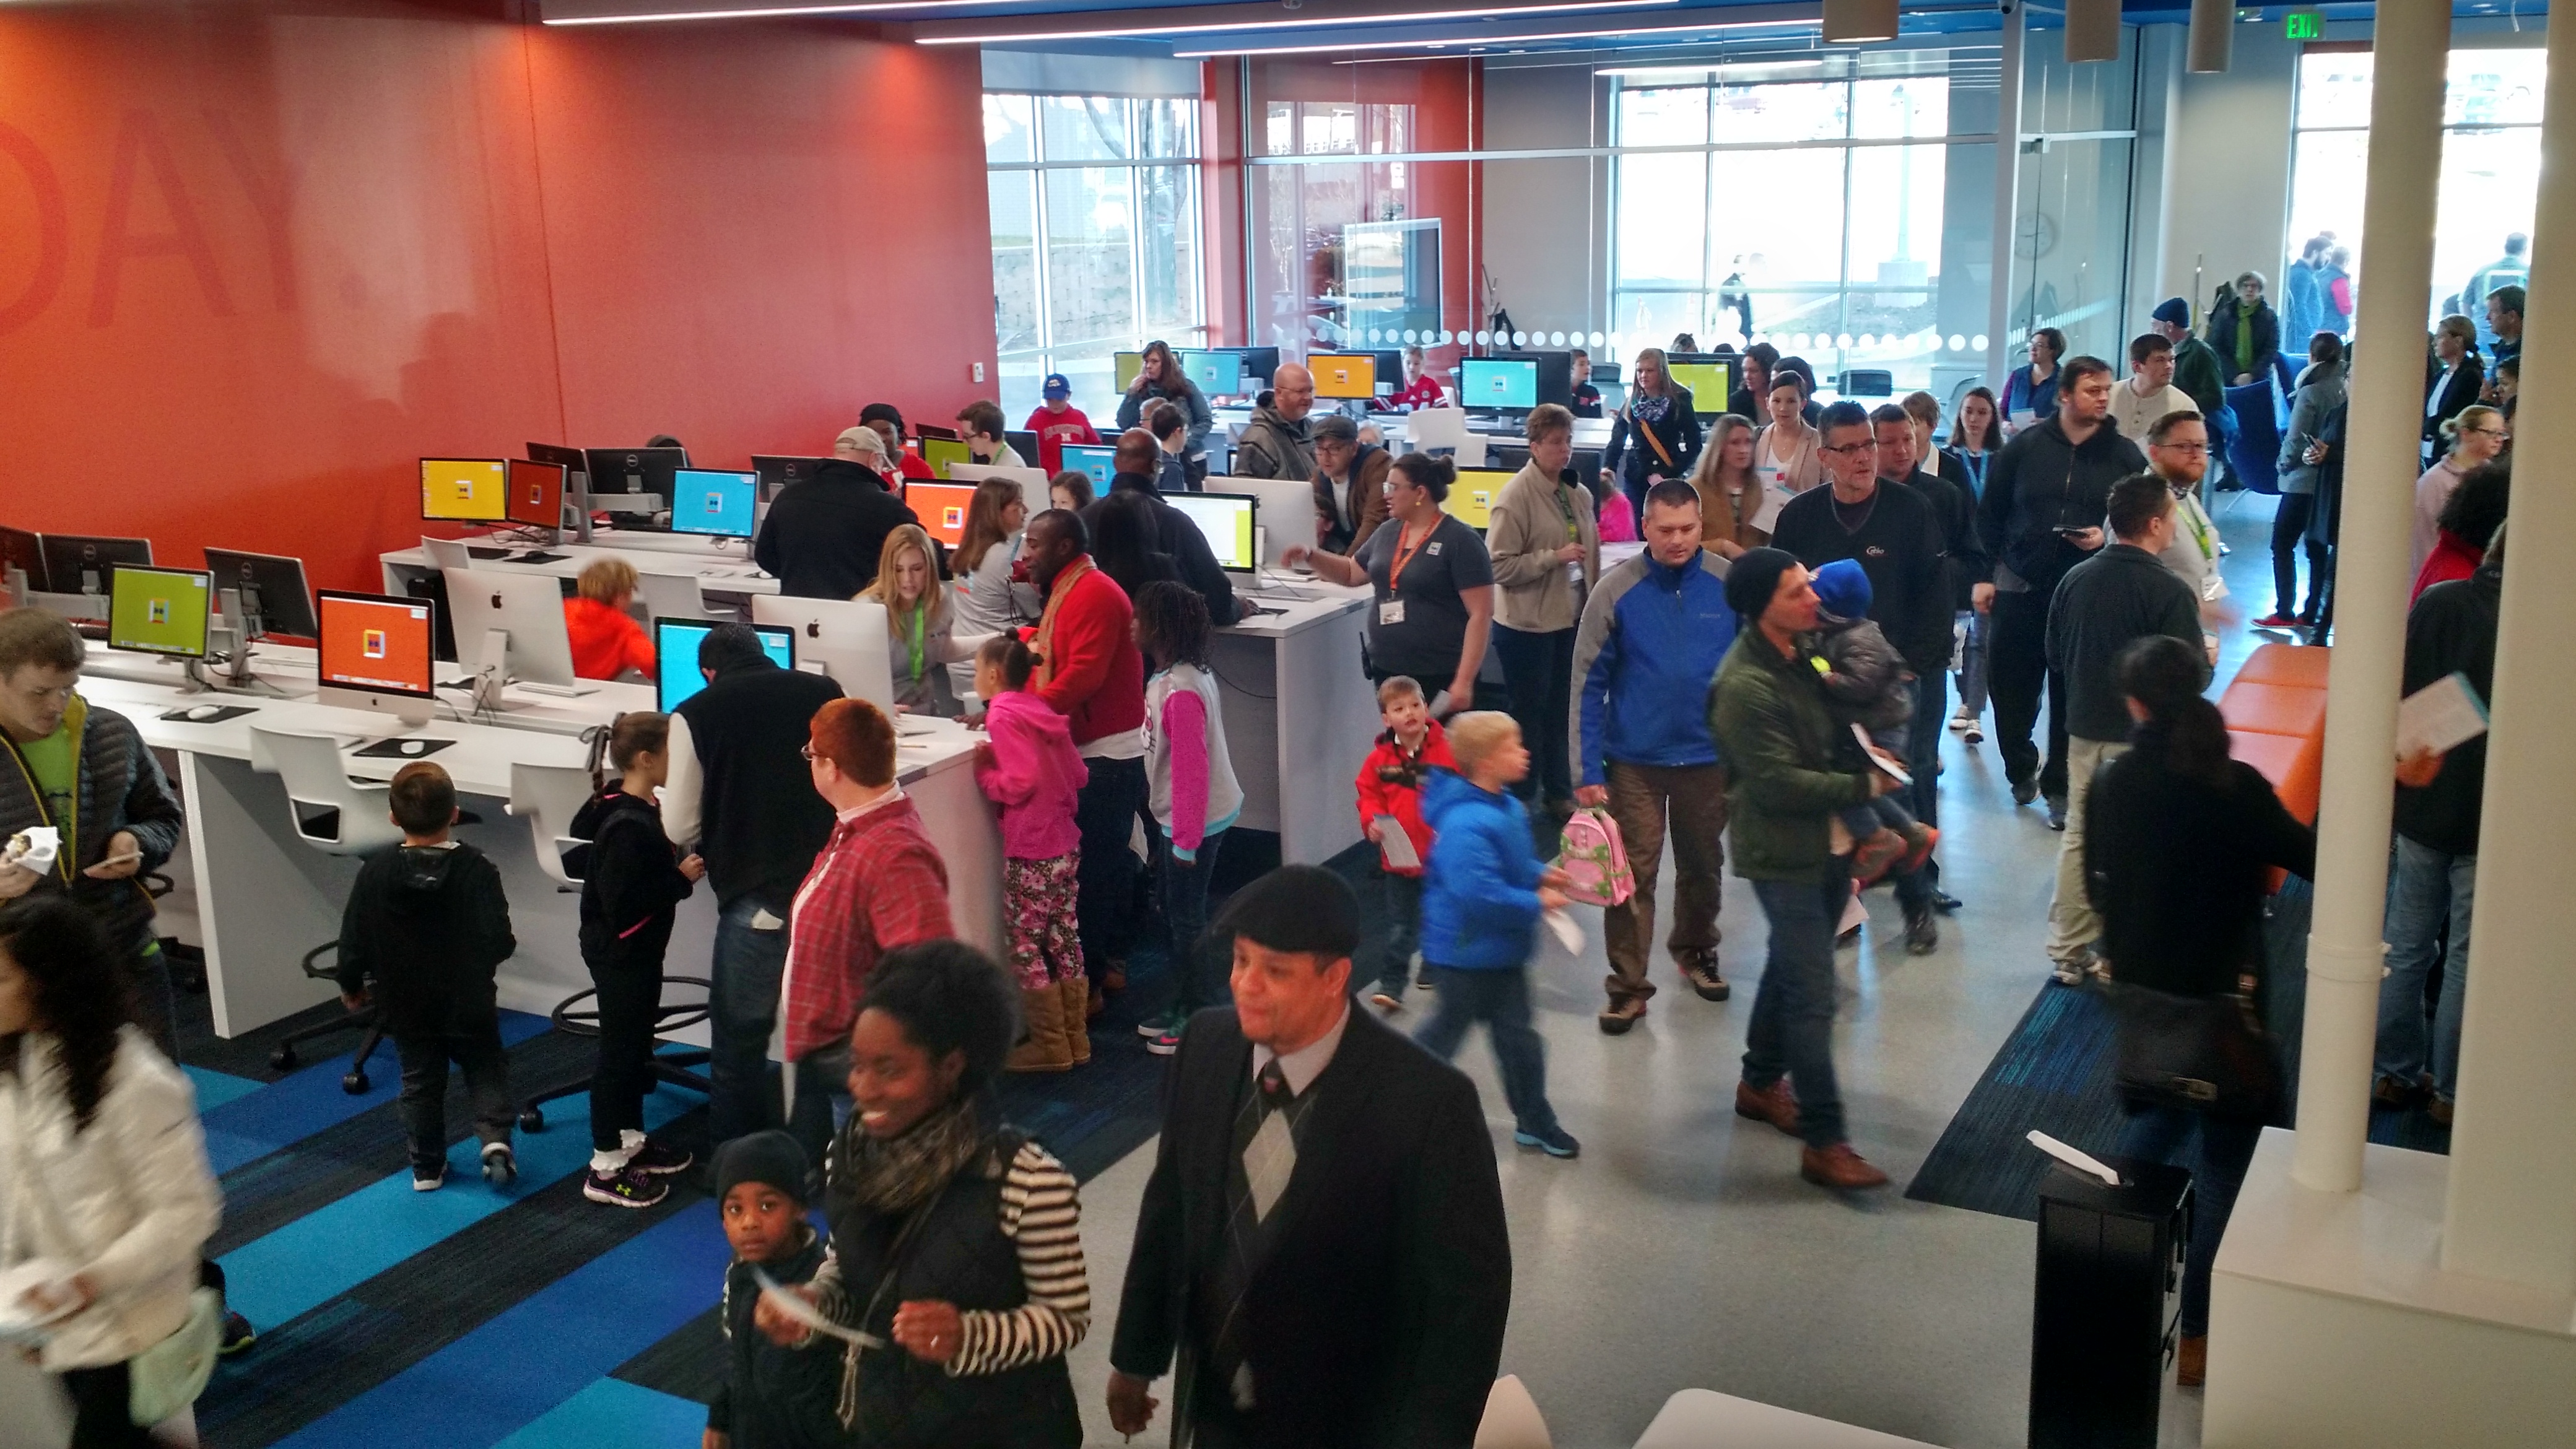 Do Space presents modern technology at Saturday’s grand opening